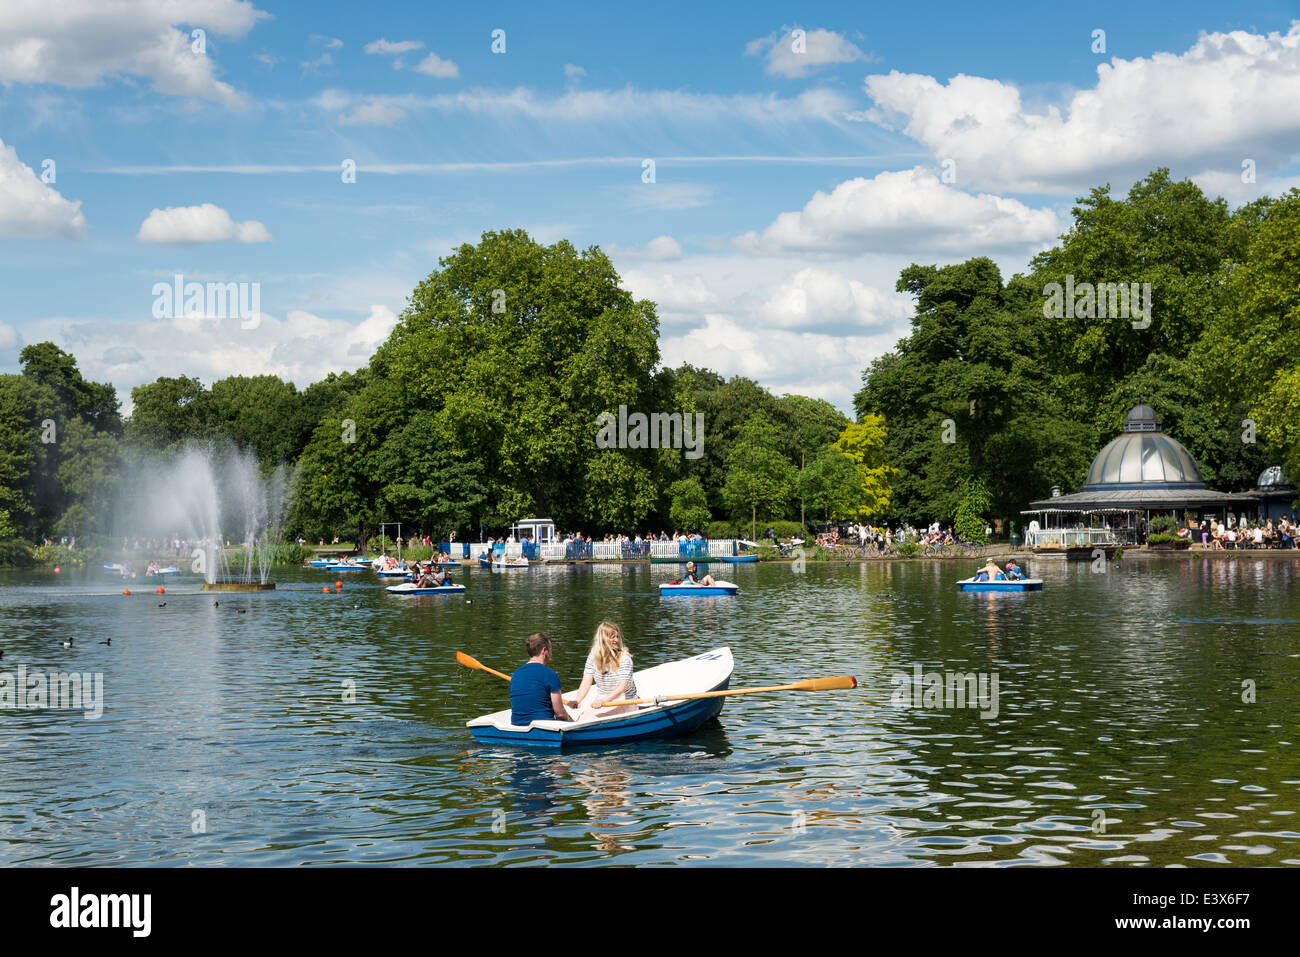 The West Boating Lake in Victoria Park, Hackney, London, England, UK Stock Photo